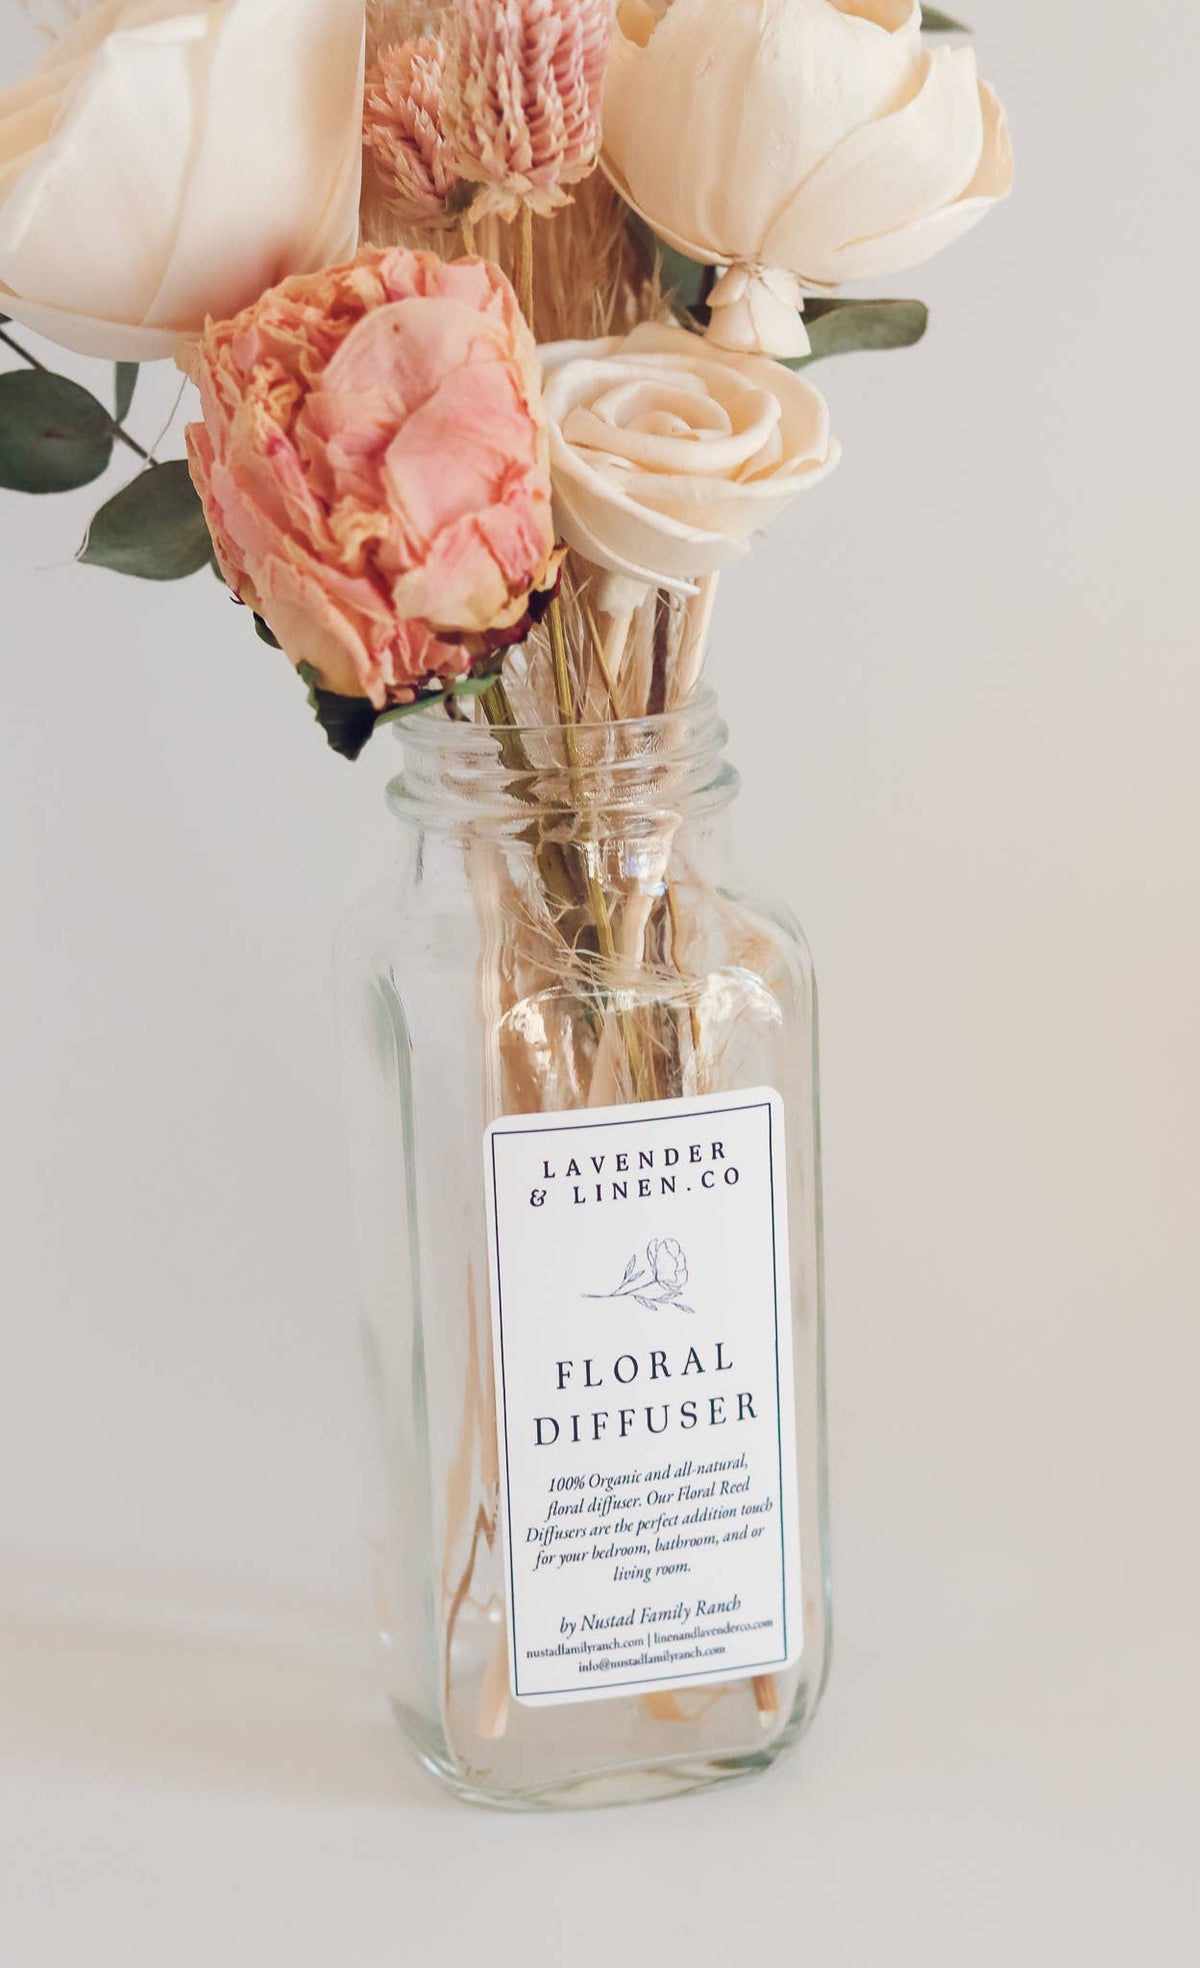 A Nustad Family Ranch Tuberose & Honey reed diffuser in a clear glass bottle with a label that reads "Nustad Family Ranch Tuberose & Honey floral diffuser" surrounded by pink peonies and pampas against a light background.